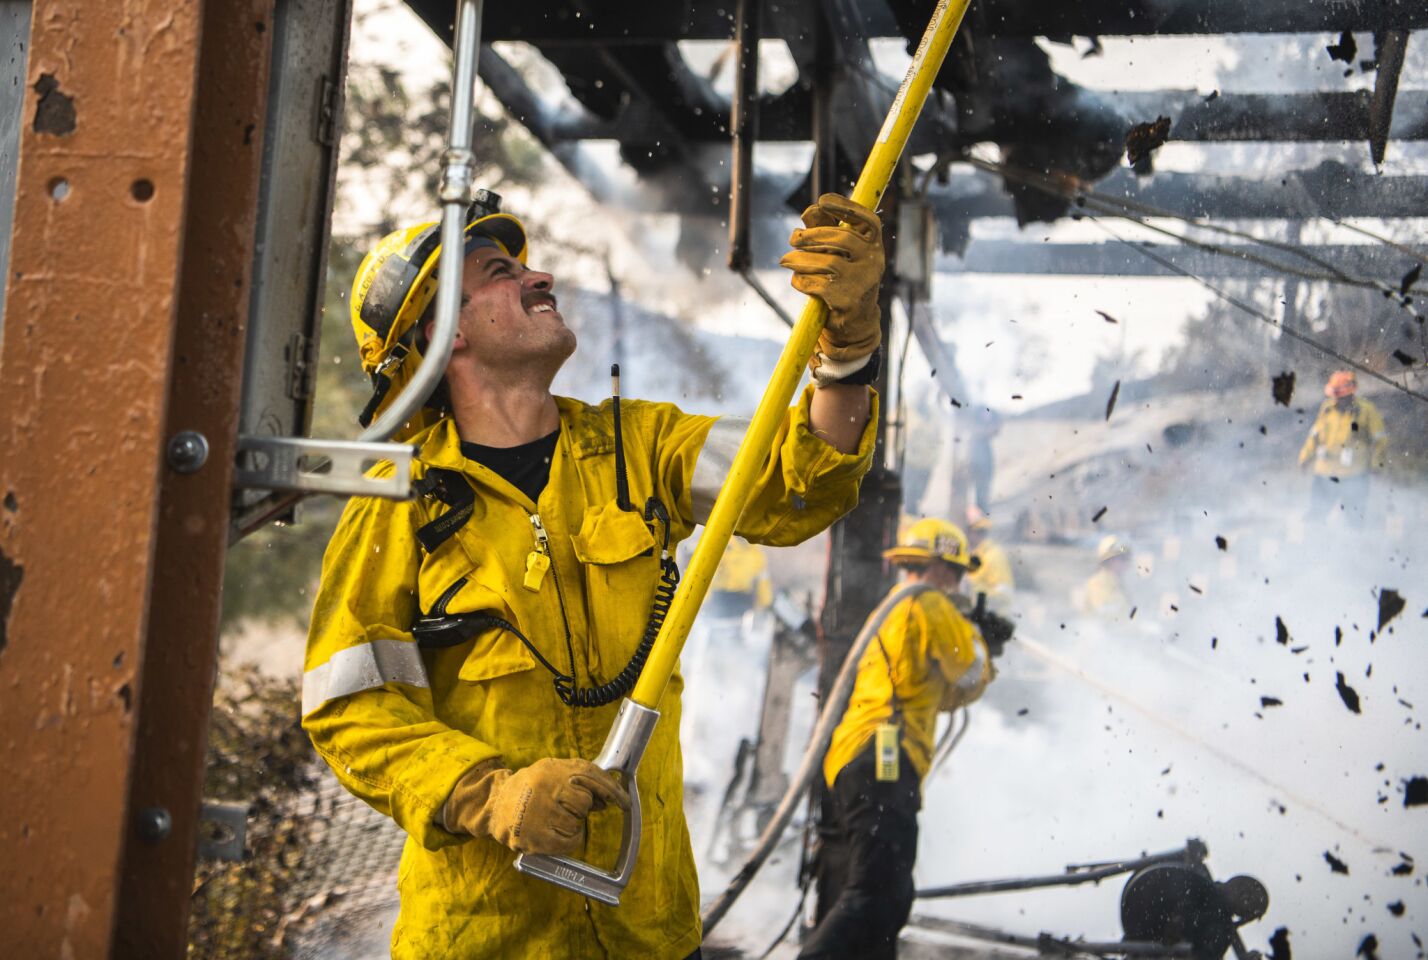 A Los Angeles County Firefighter fights a structure fire at Camp 13, an inmate fire crew camp run by the Los Angeles County Fire Department off Decker Road above Malibu.